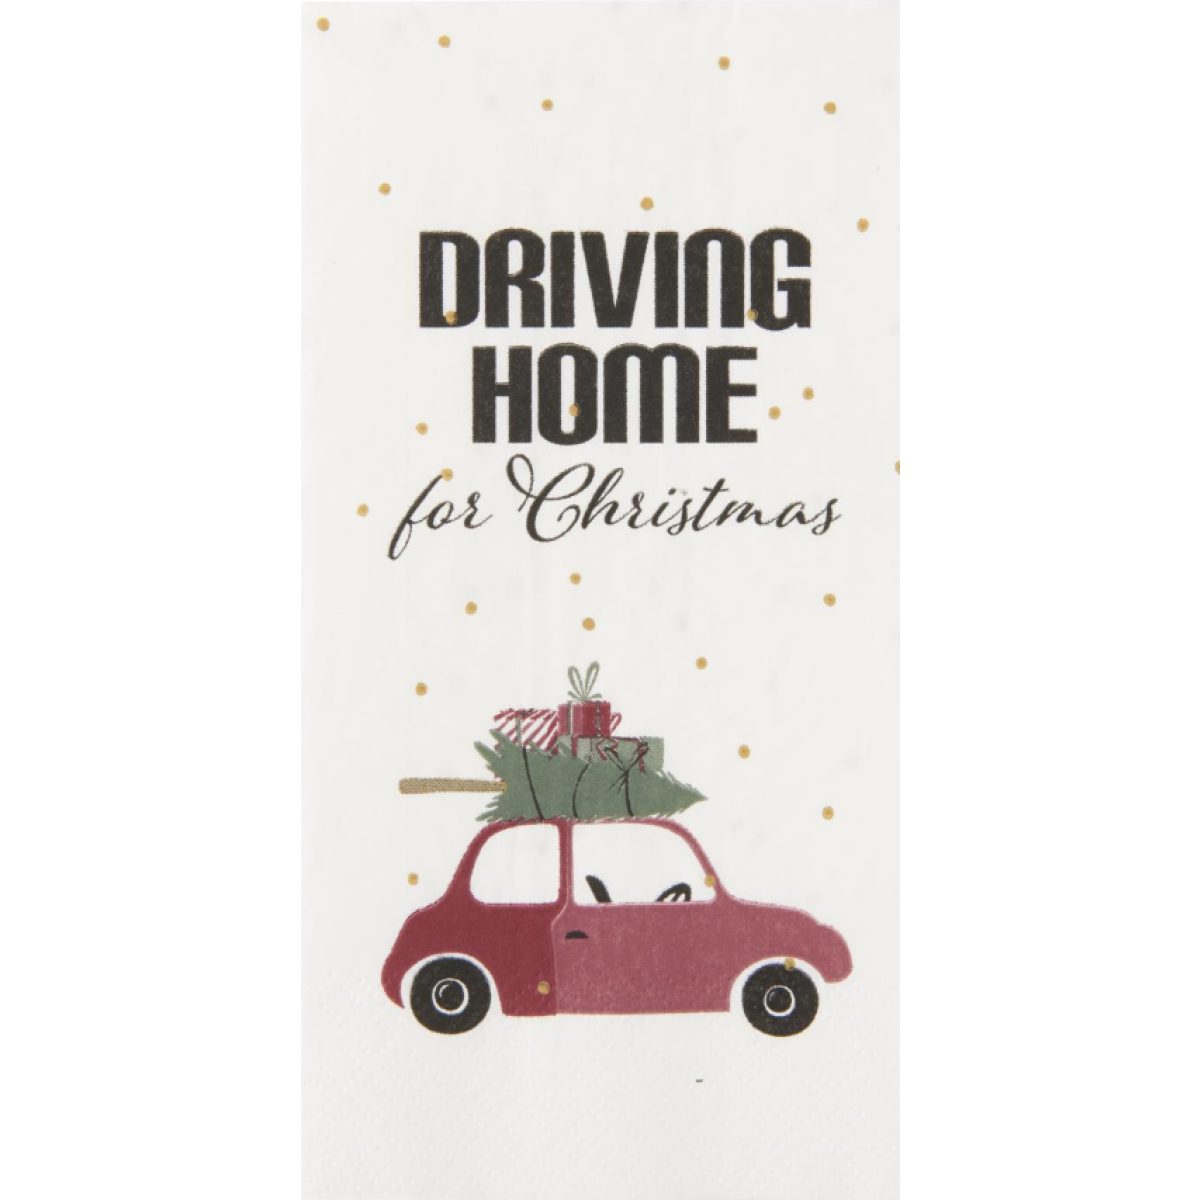 Serviette "Driving home for christmas" mit Auto